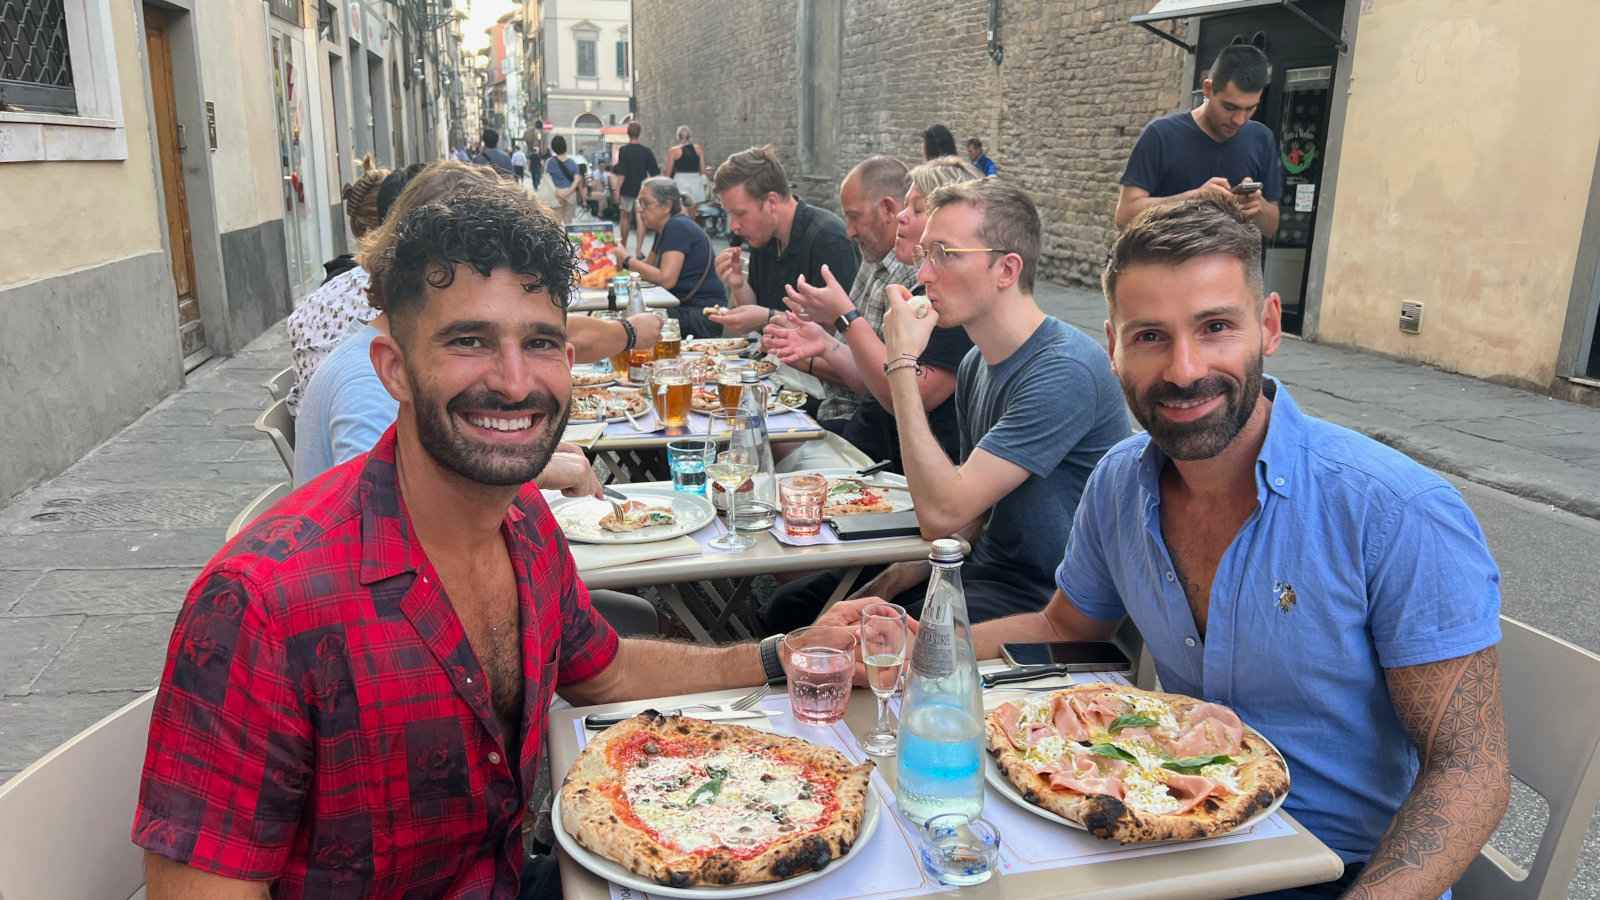 Stefan and Seby sitting and smiling at outdoor tables in Florence with pizzas in front of them.